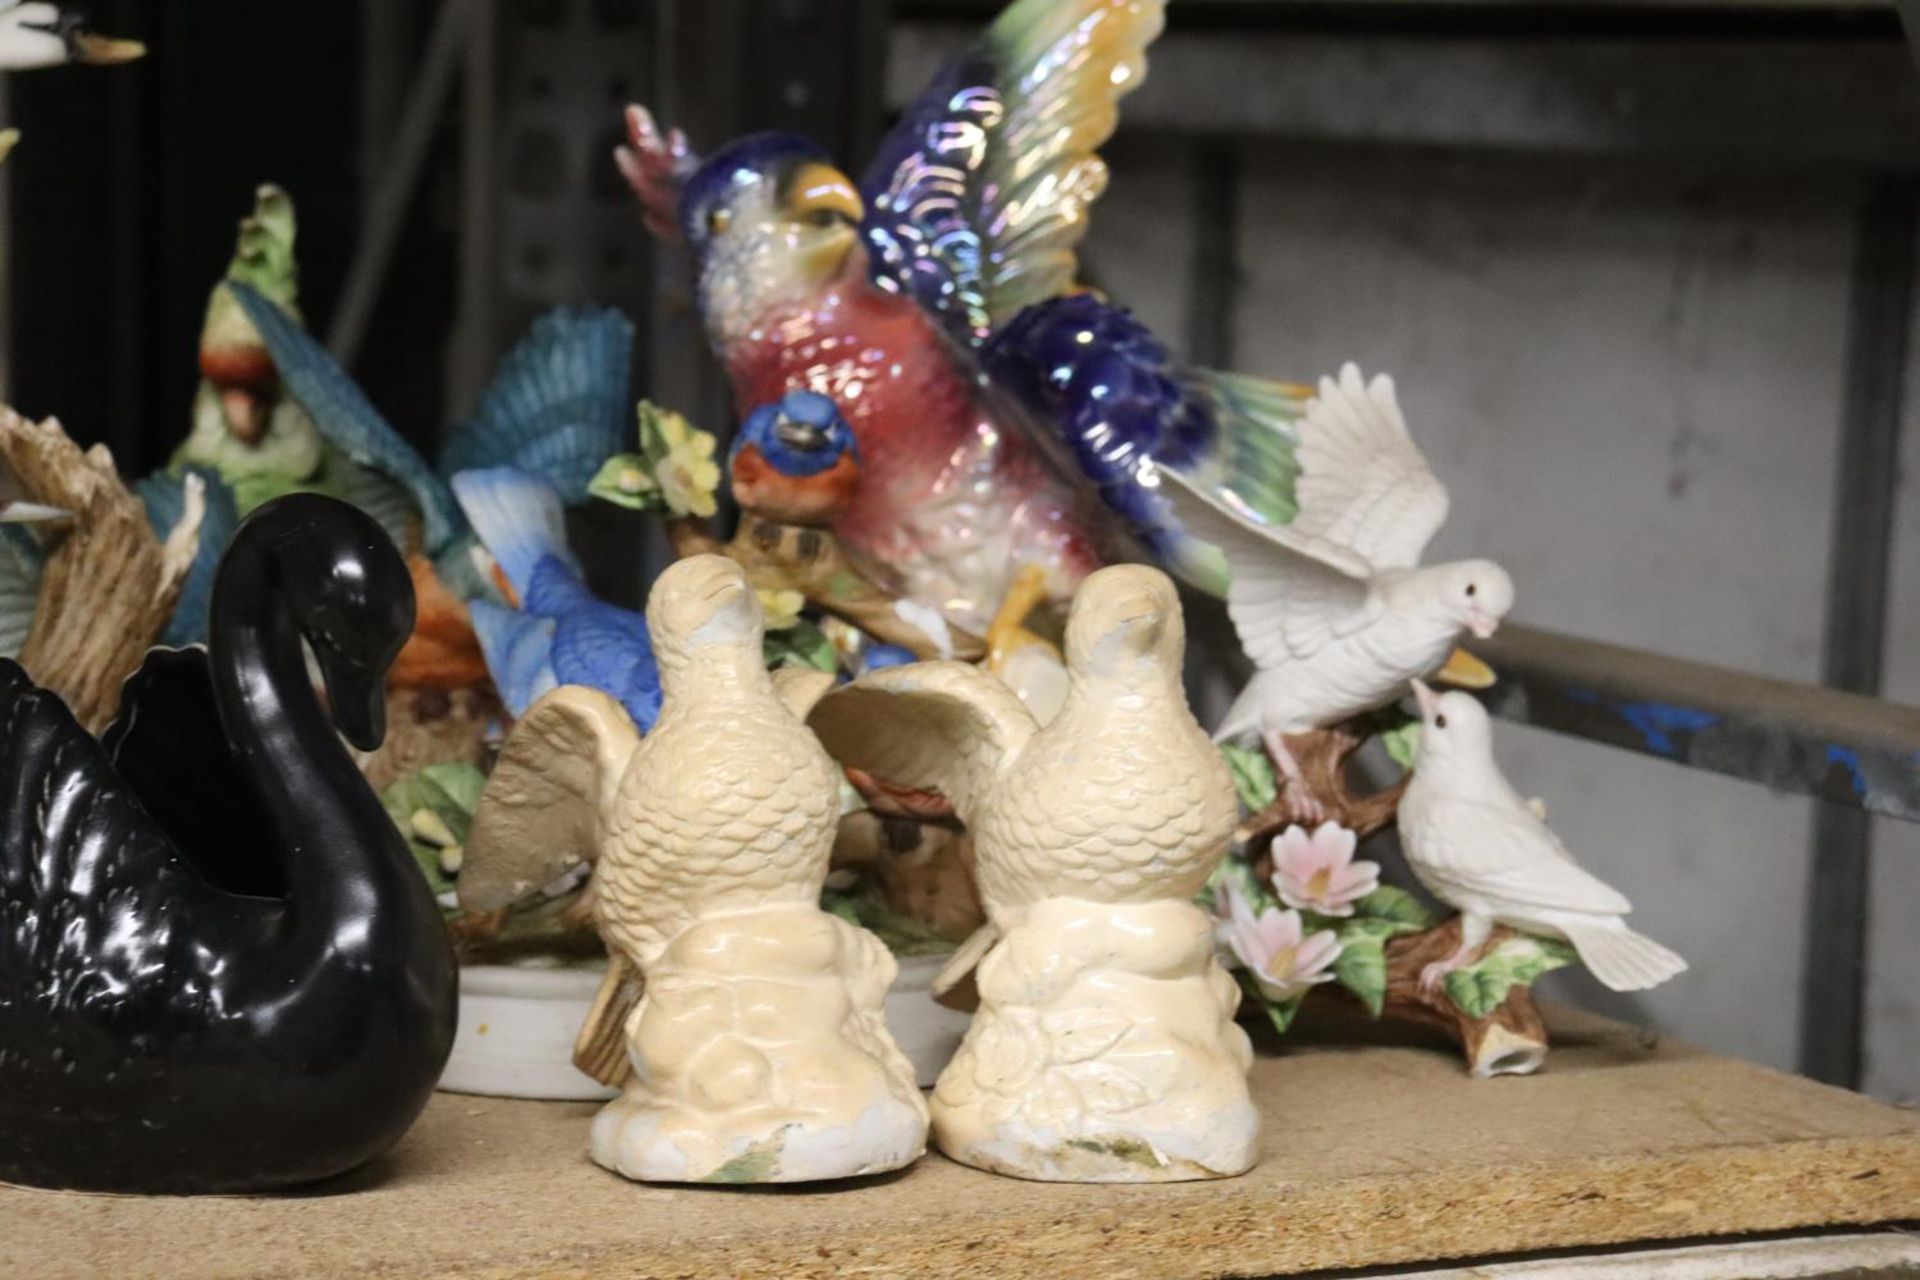 A COLLECTION OF BIRD FIGURINES TO INCLUDE SWANS, A PARROT, WOODPECKER, ETC - Image 3 of 6